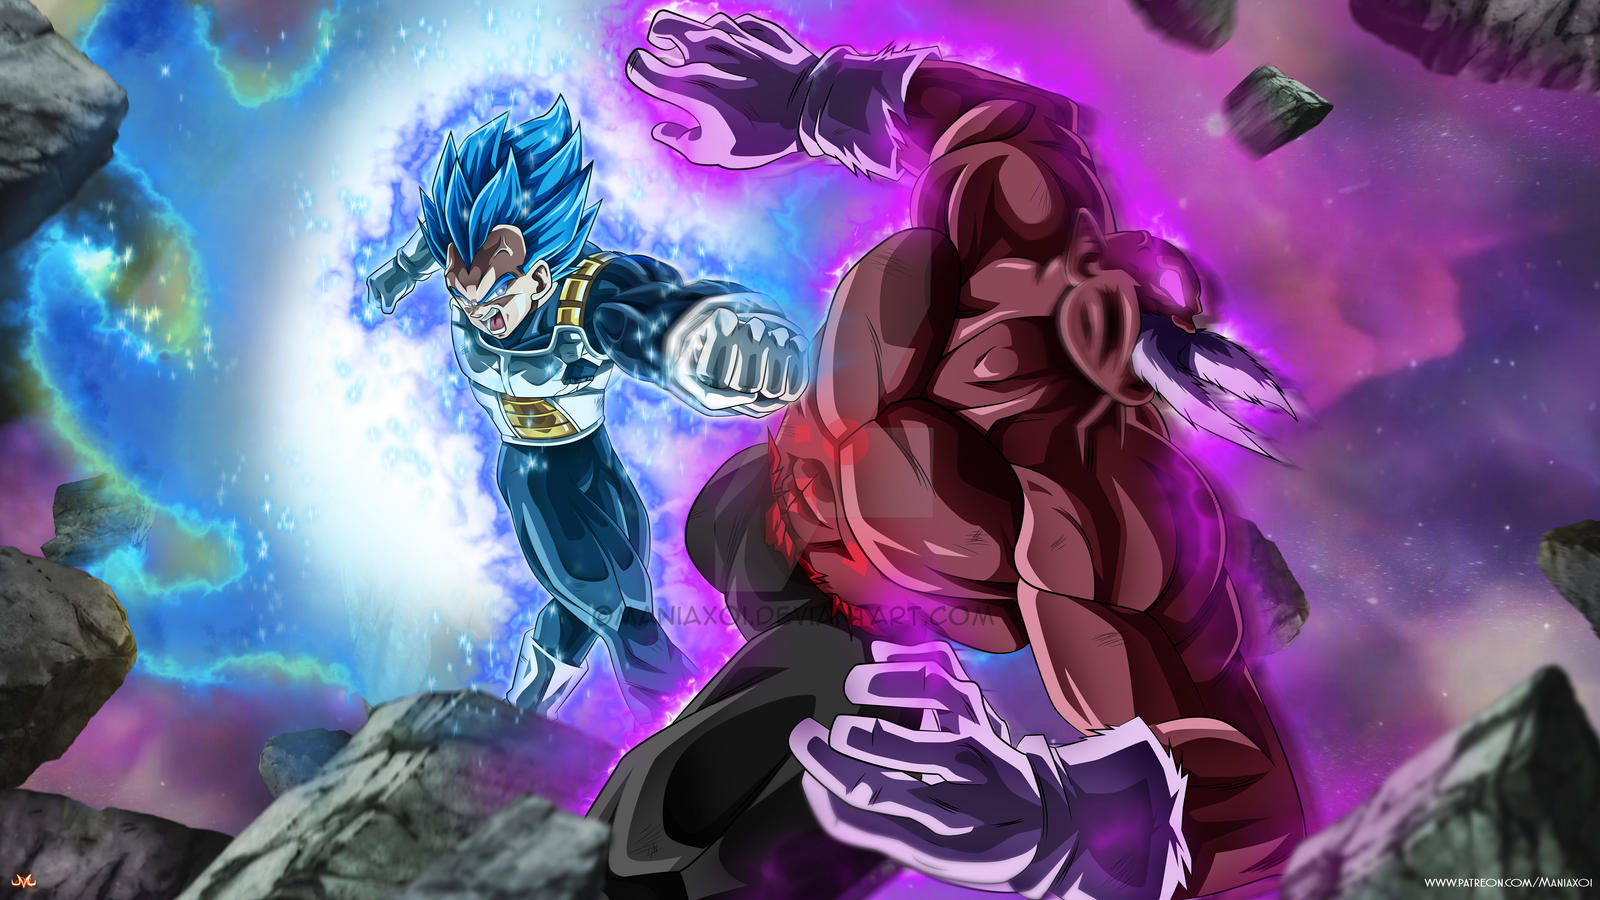 While rewatching GT I've came to the conclusion that Gogeta SSJ4